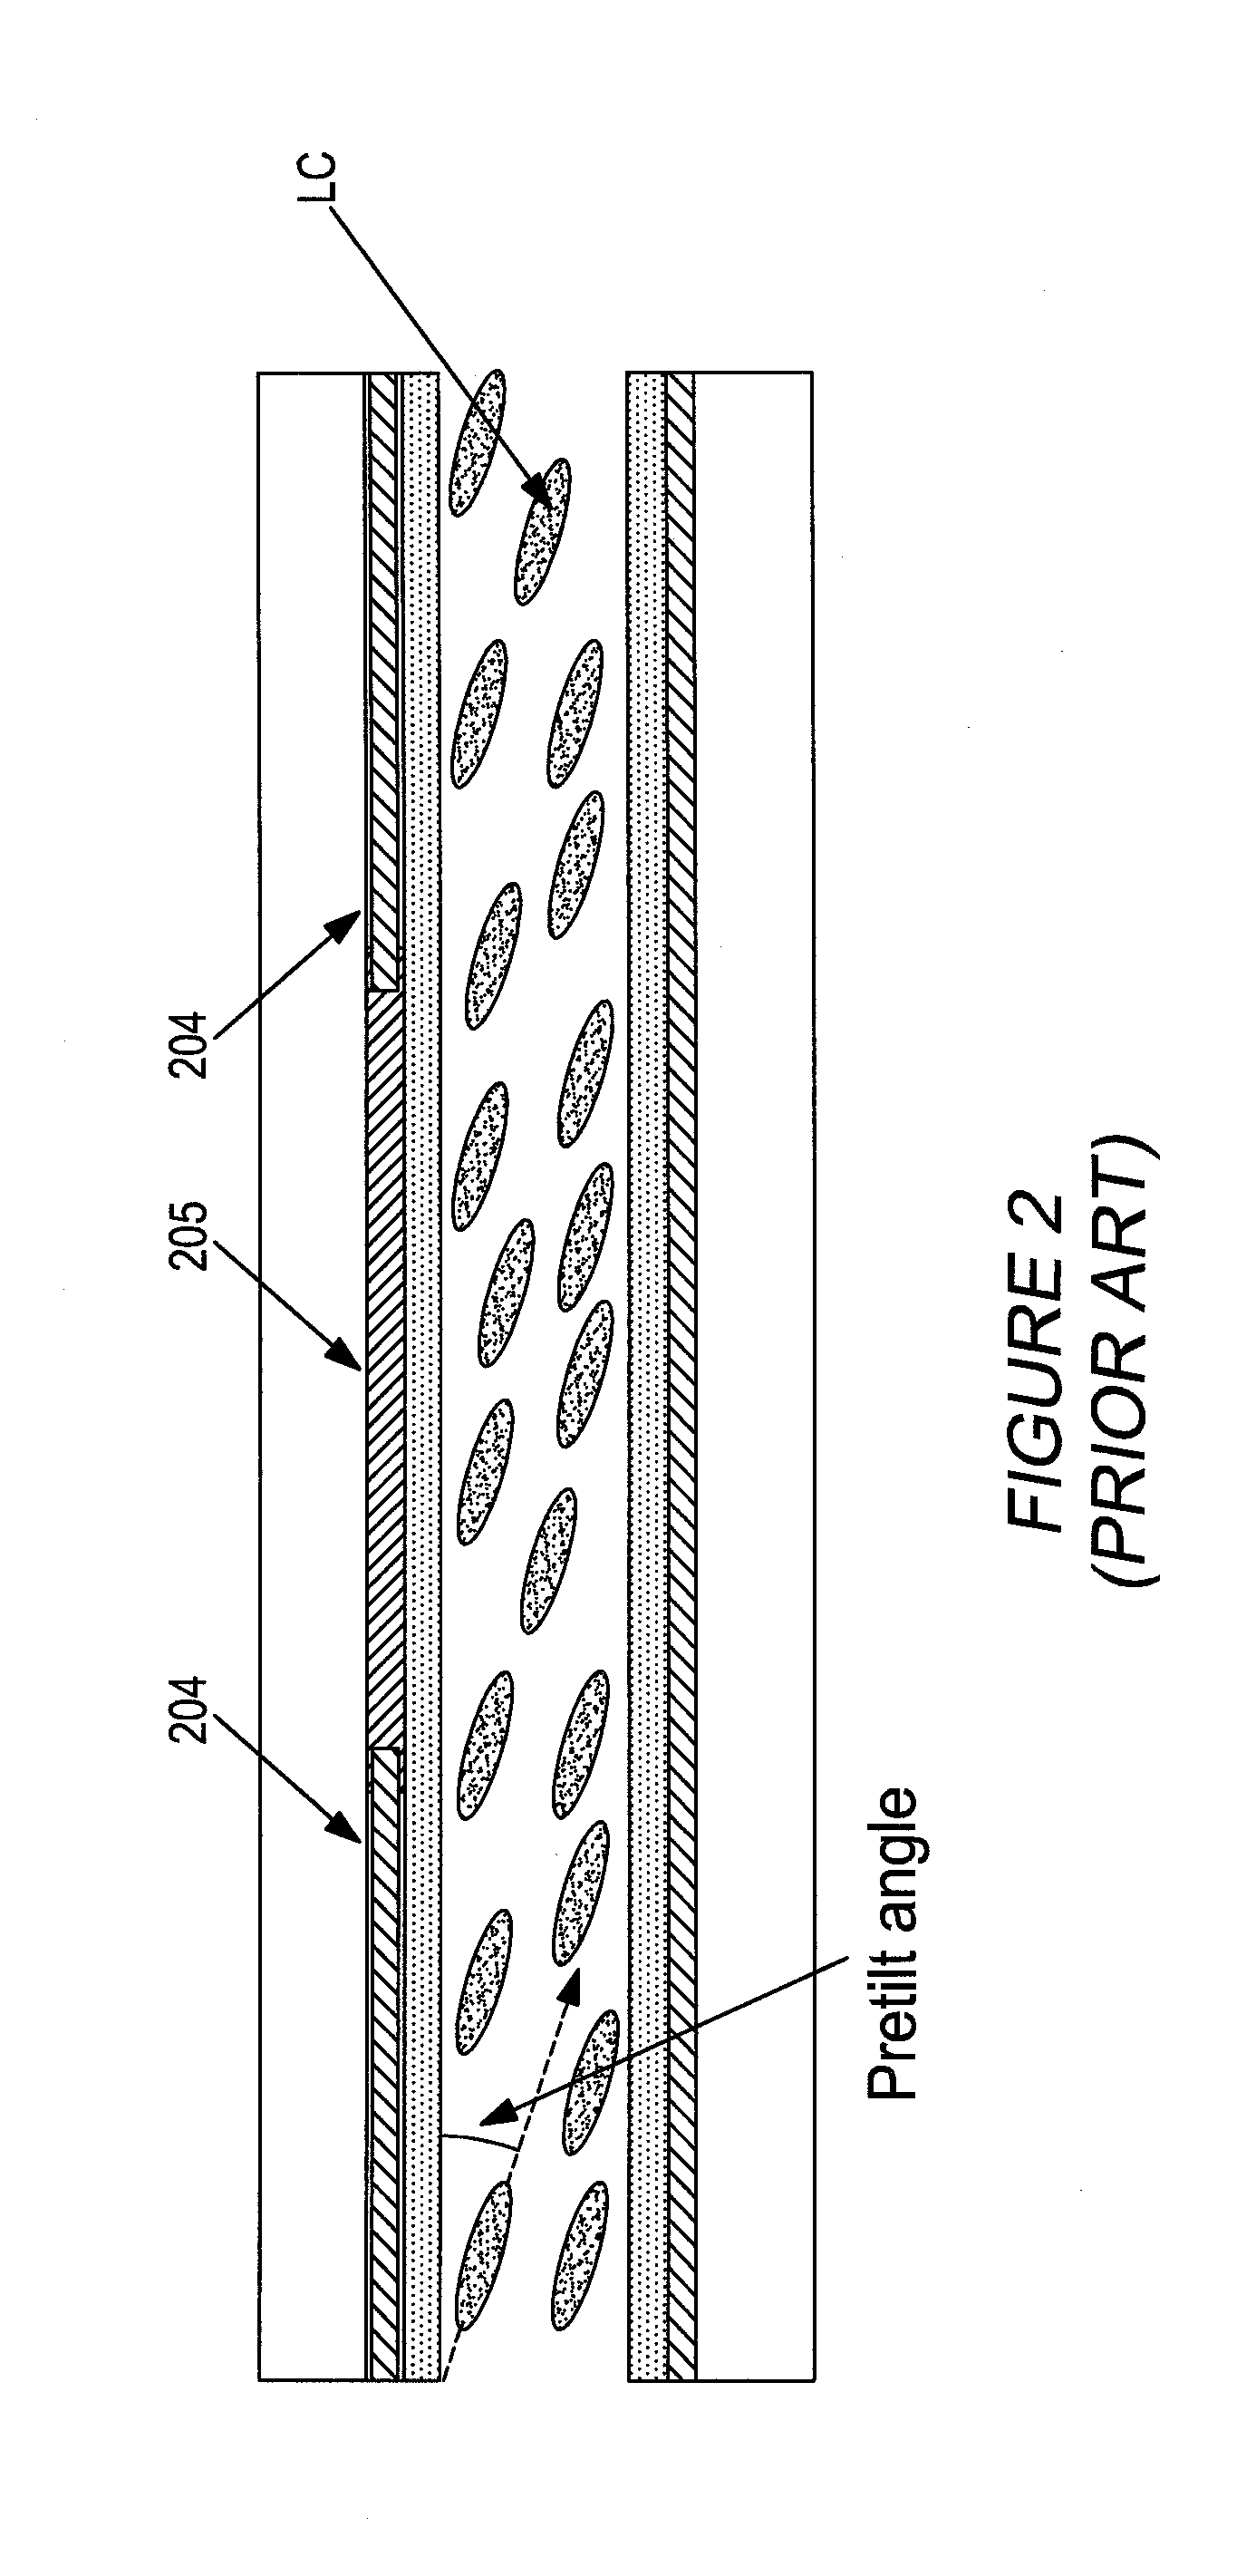 Image stabilization and shifting in a liquid crystal lens